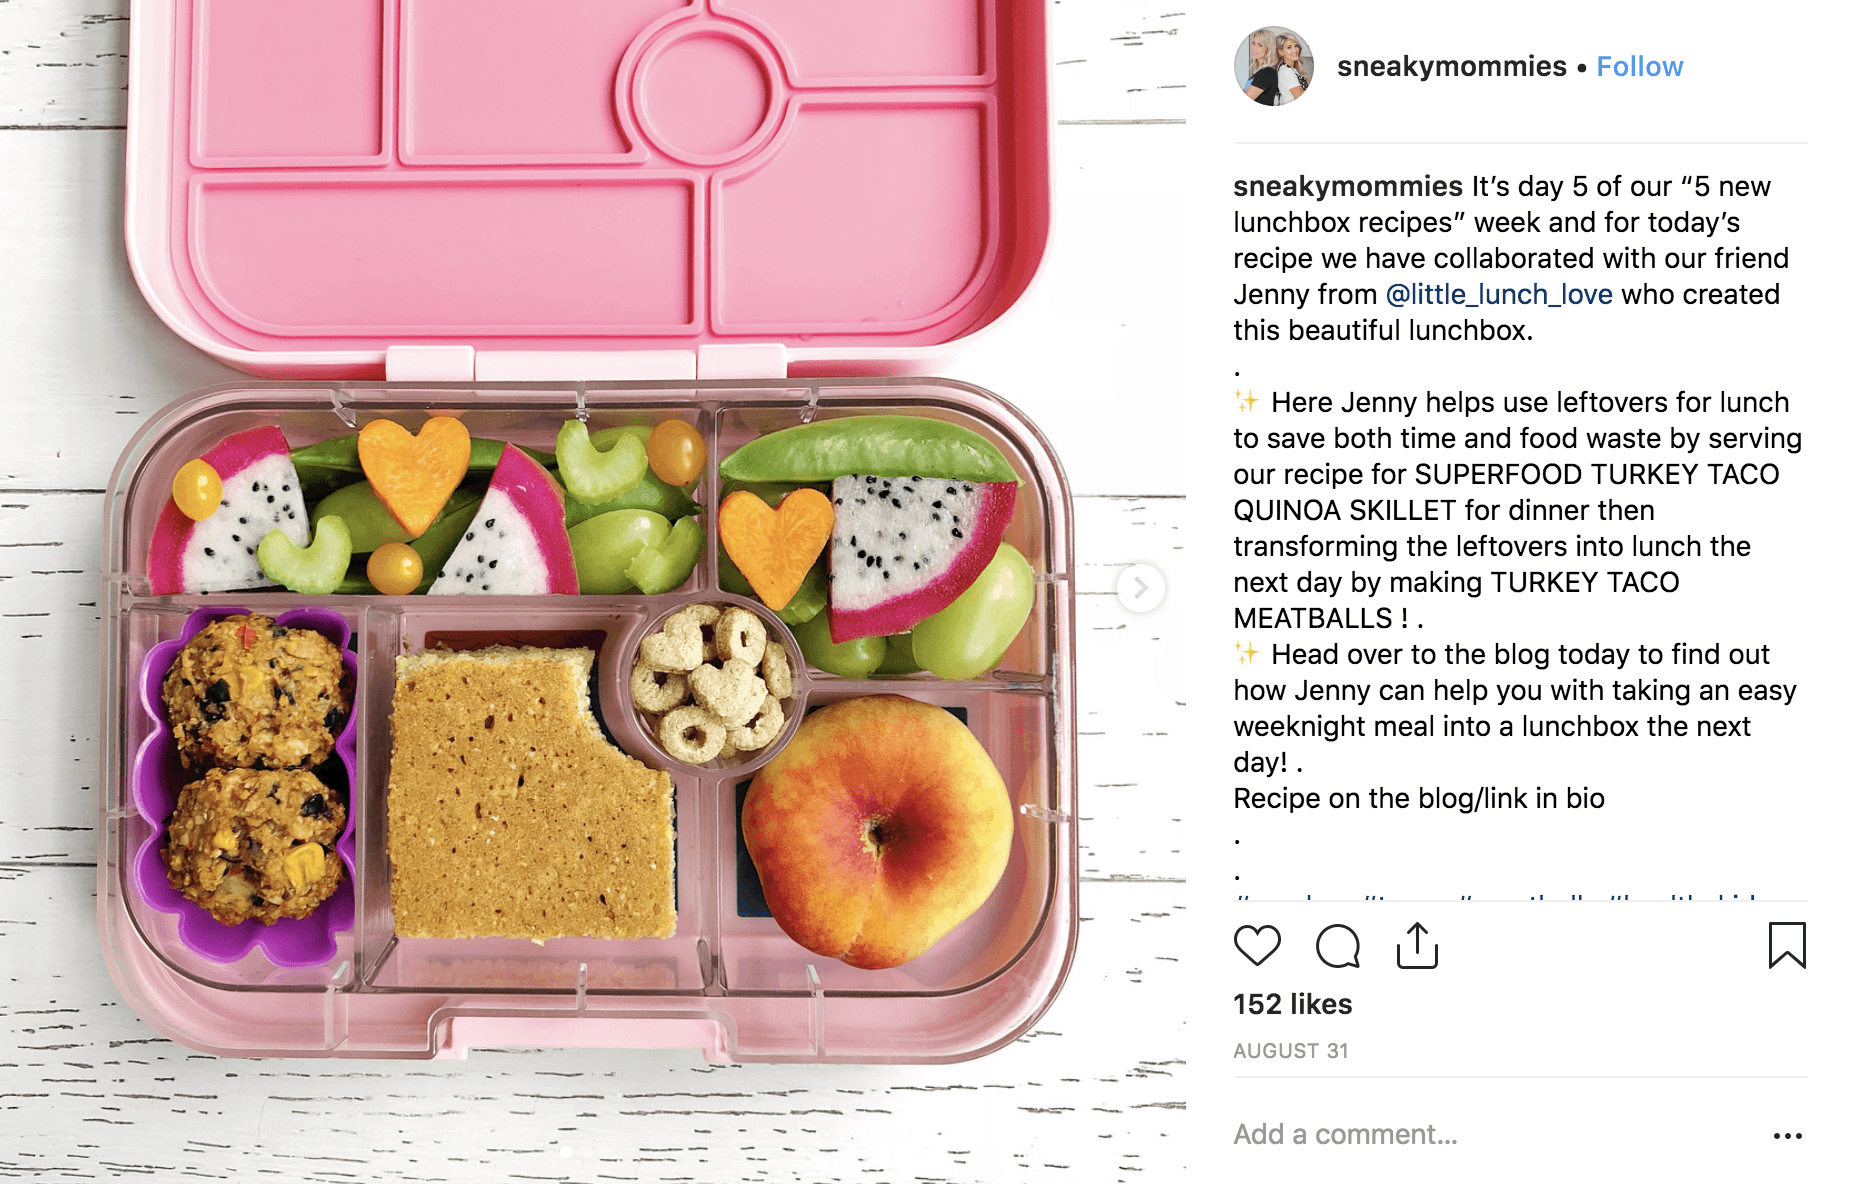 morgan raphael bun undone a health wellness and inspiration influencer with nearly 15k followers offers some advice when it comes to whether or not - instagram com health followers